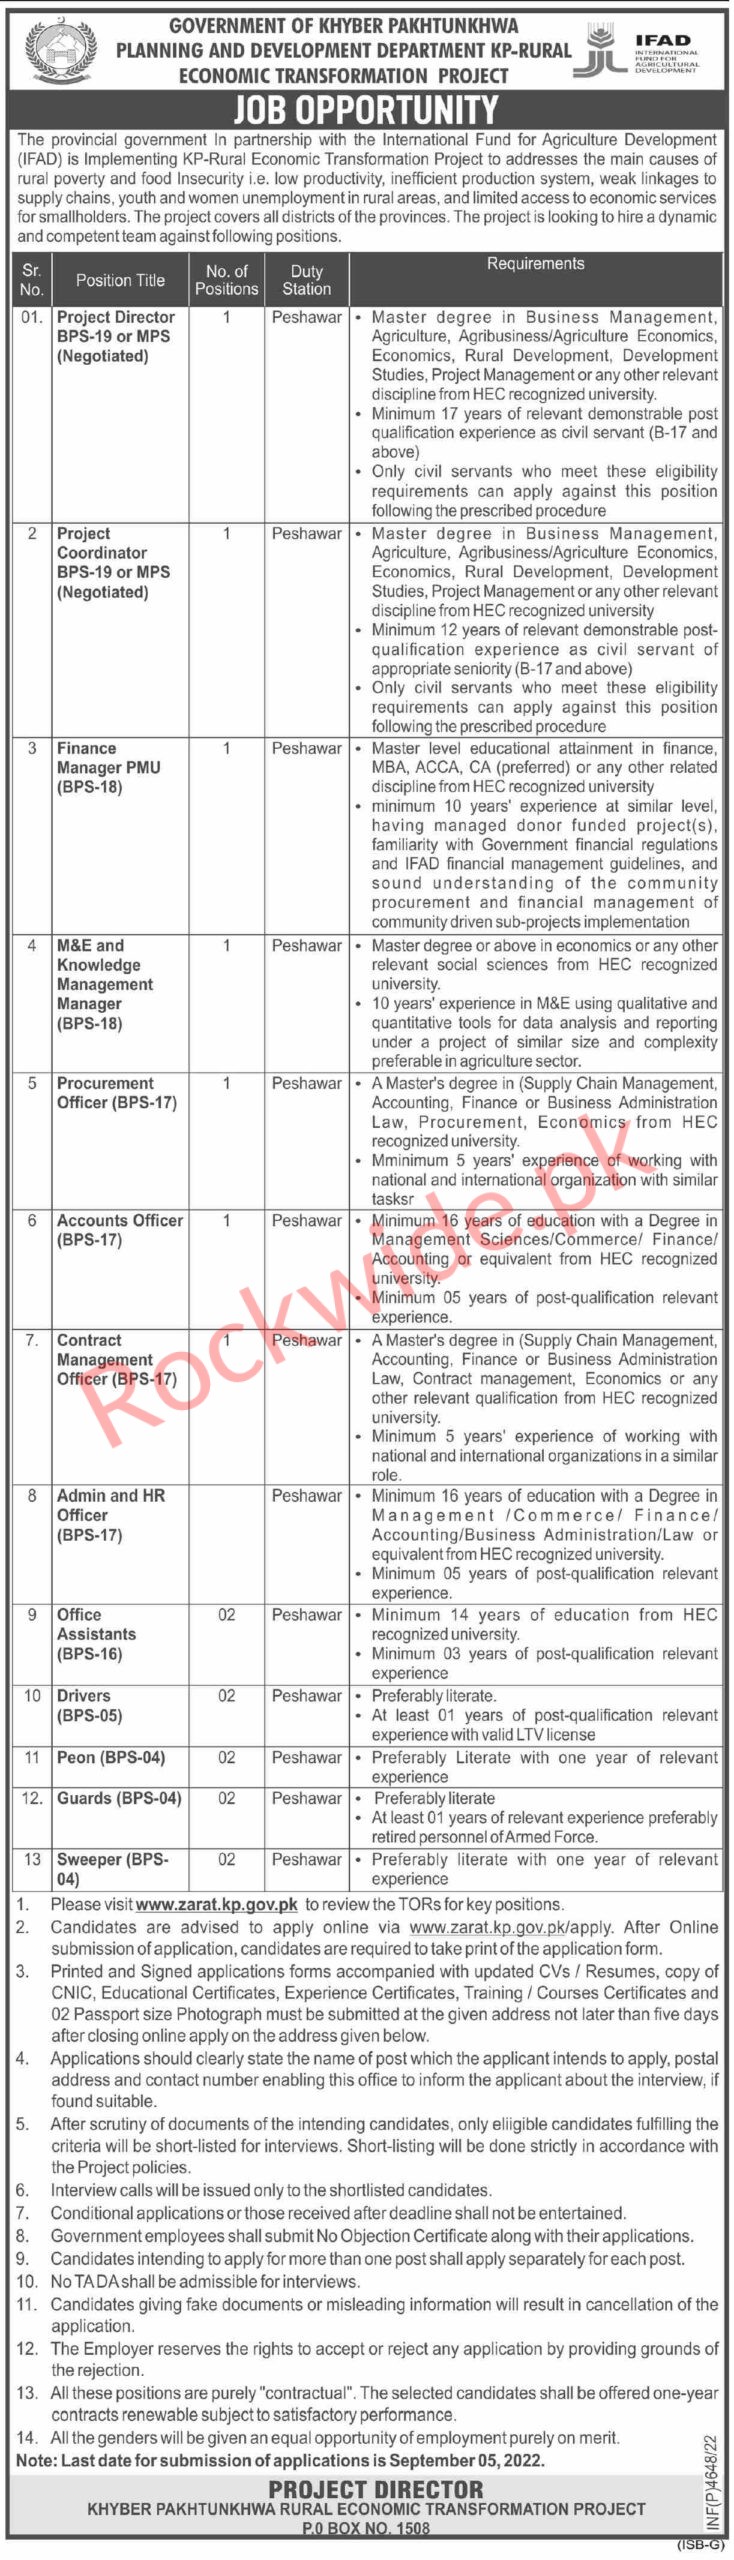 Government of Khyber Pakhtunkhwa Planning And Development Jobs in Peshawar